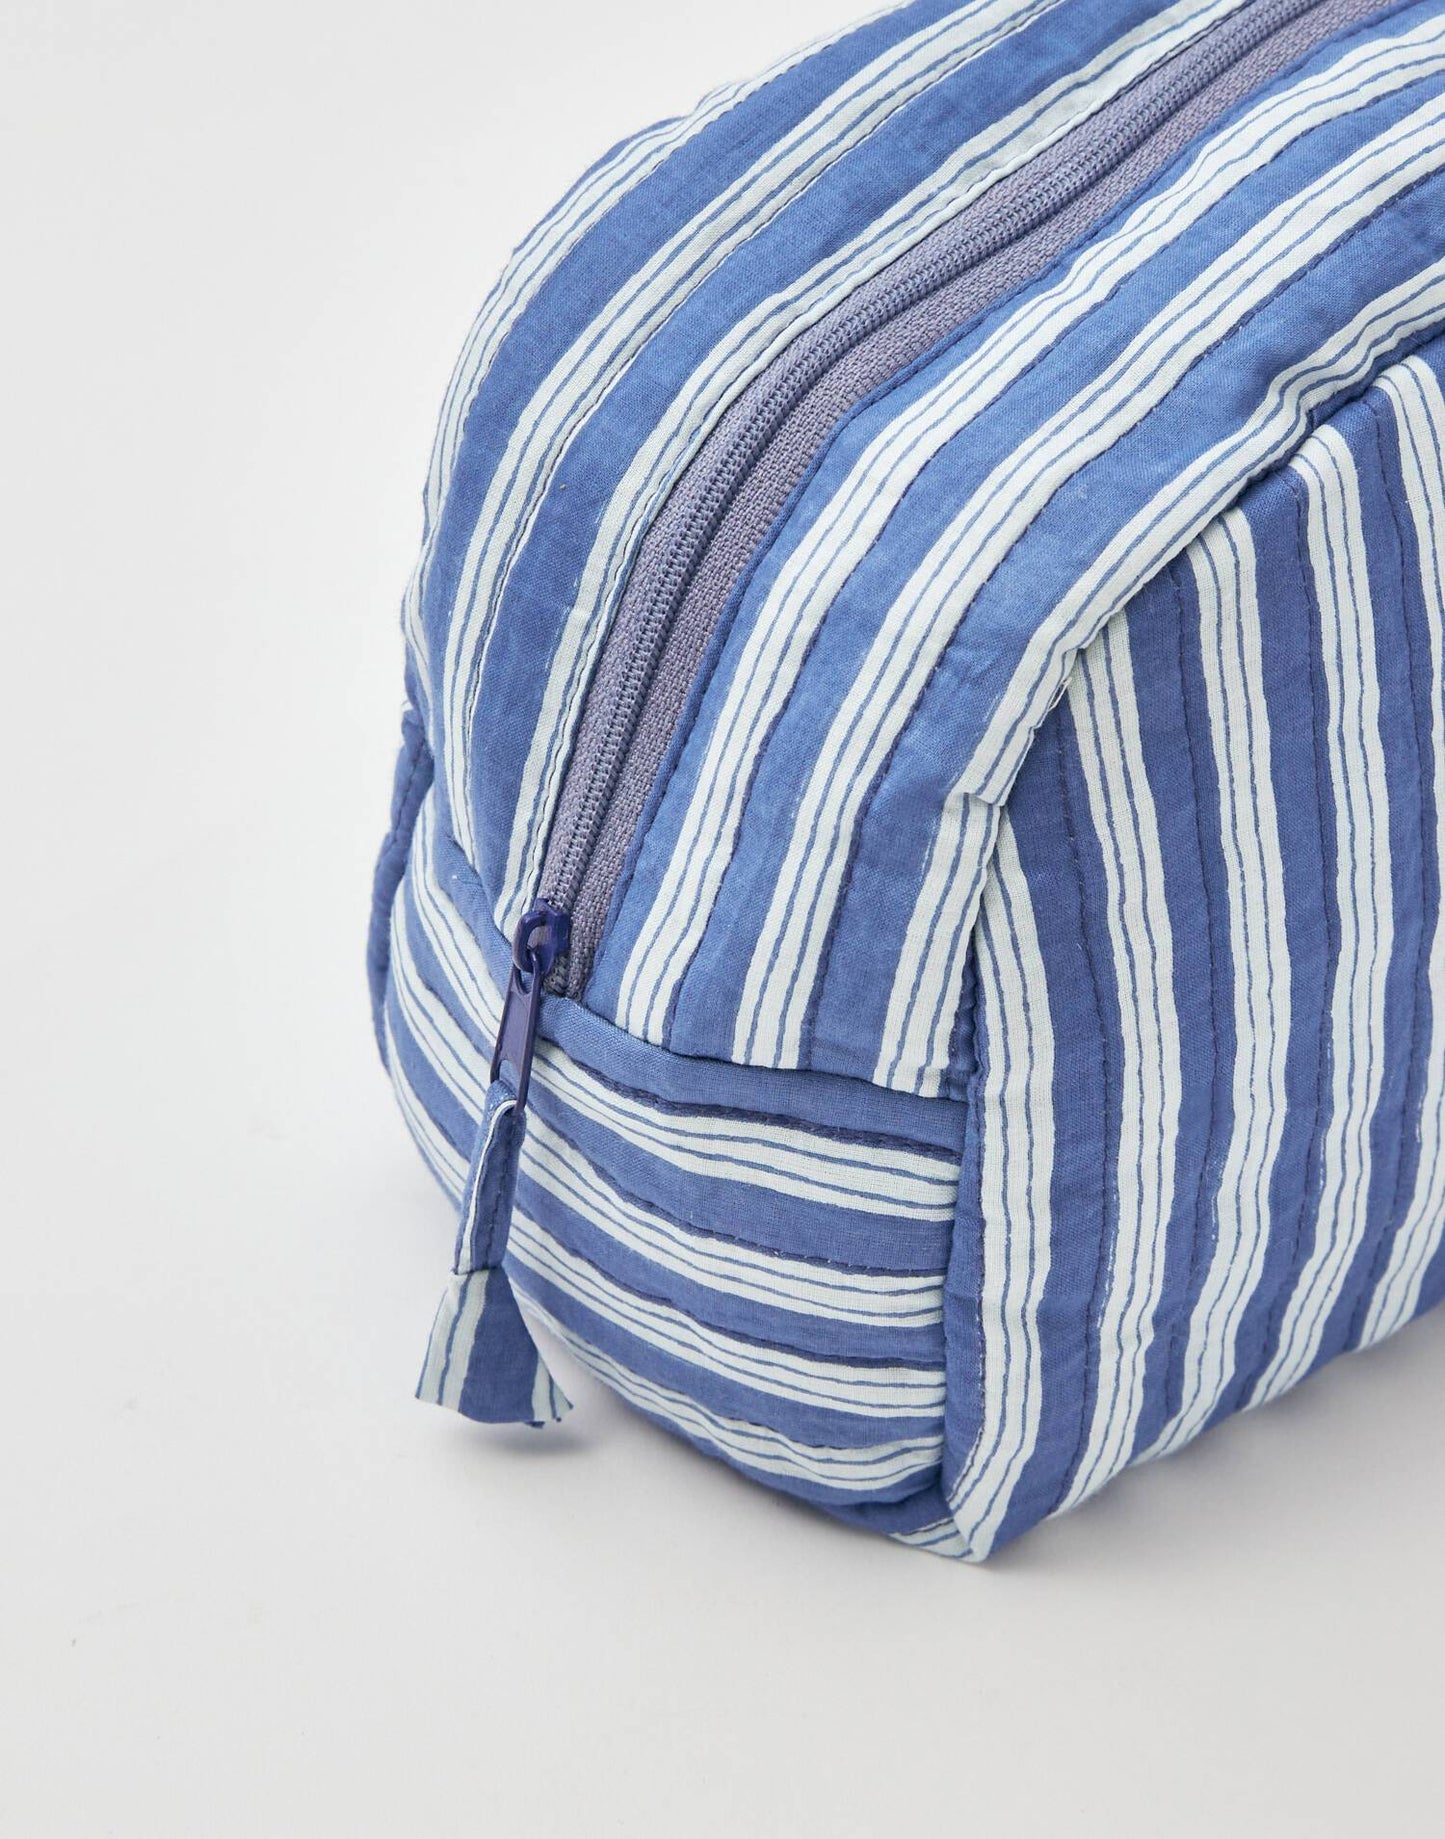 Striped toiletry bag